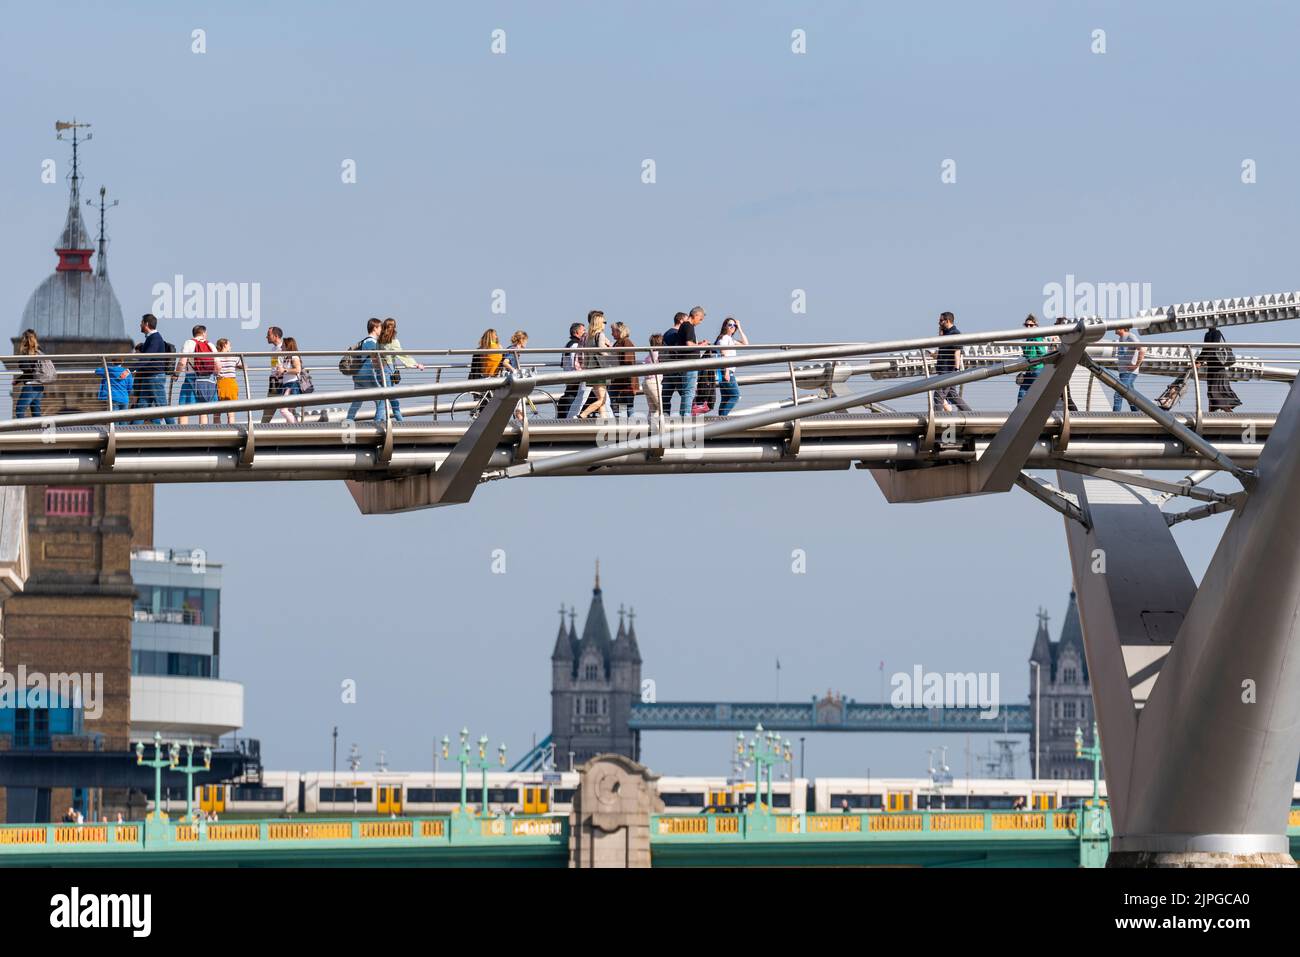 People walking across the Millennium Bridge over the River Thames, London, UK, in front of Tower Bridge. People, train and bridges crossing Thames Stock Photo